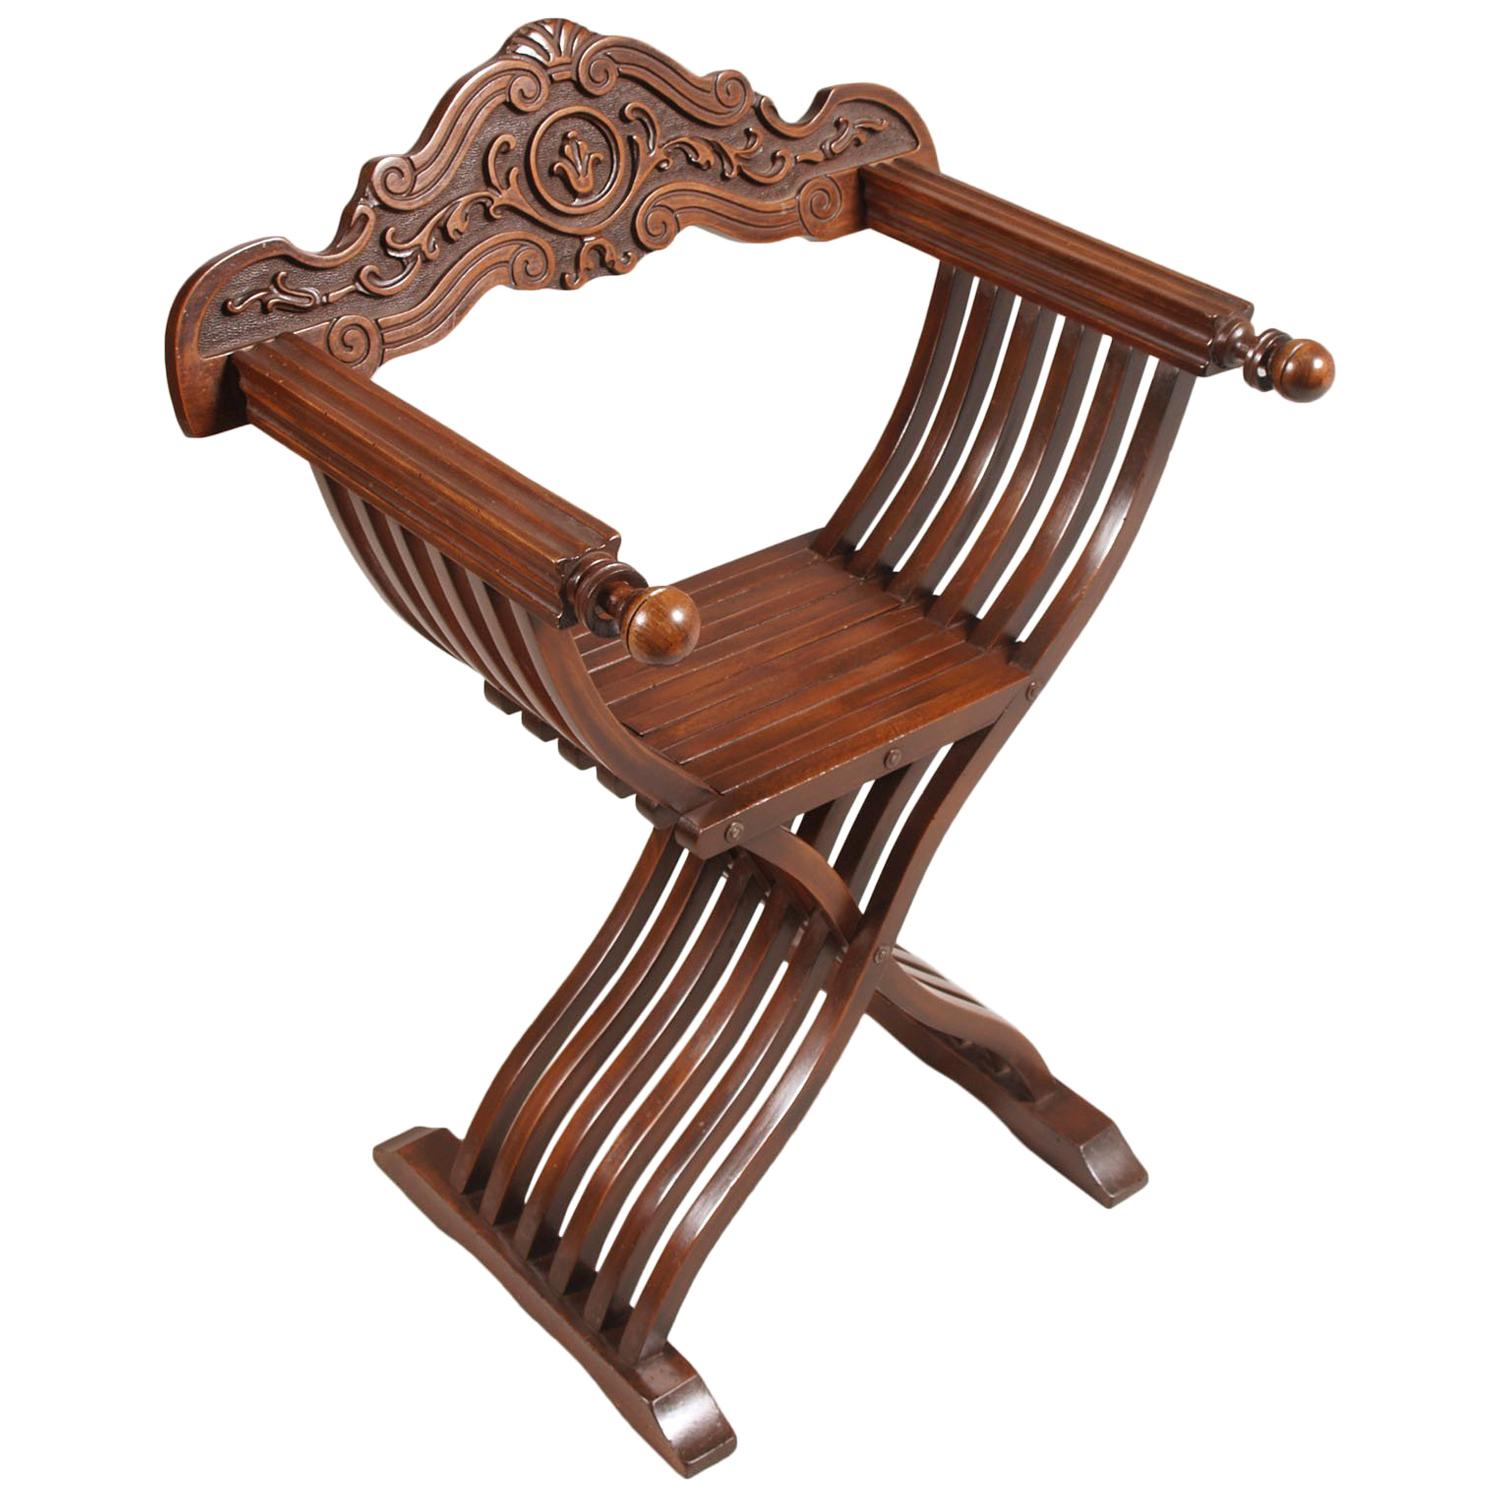 Renaissance Revival Savonarola Chair in Carved Walnut Restored and Wax Polished